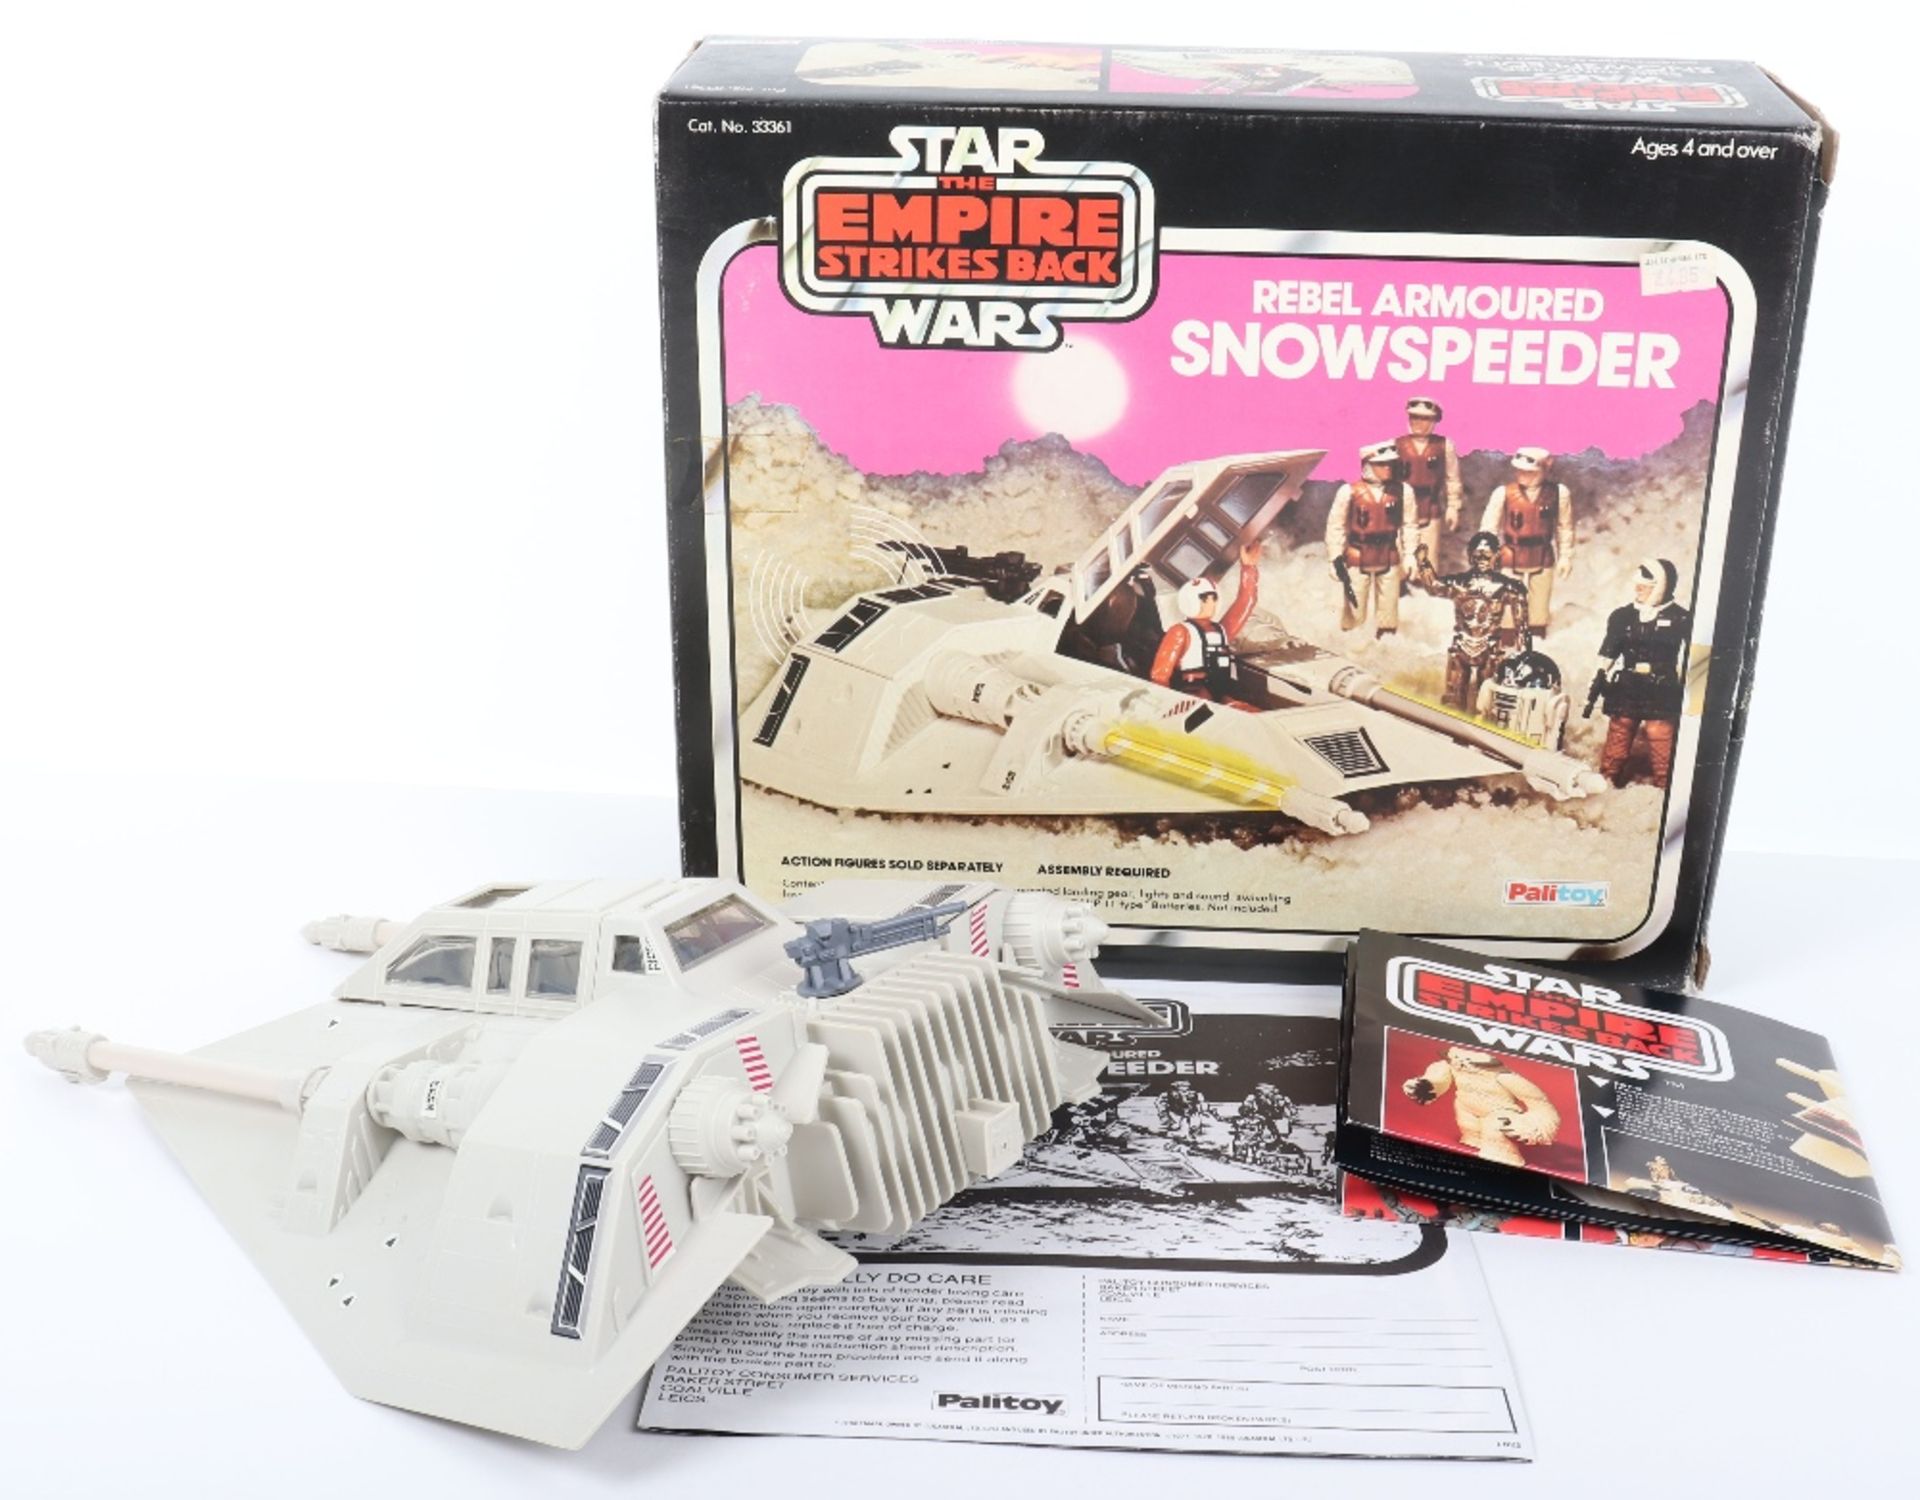 Boxed Palitoy Star Wars The Empire Strikes Back Rebel Armoured Snowspeeder - Image 2 of 11